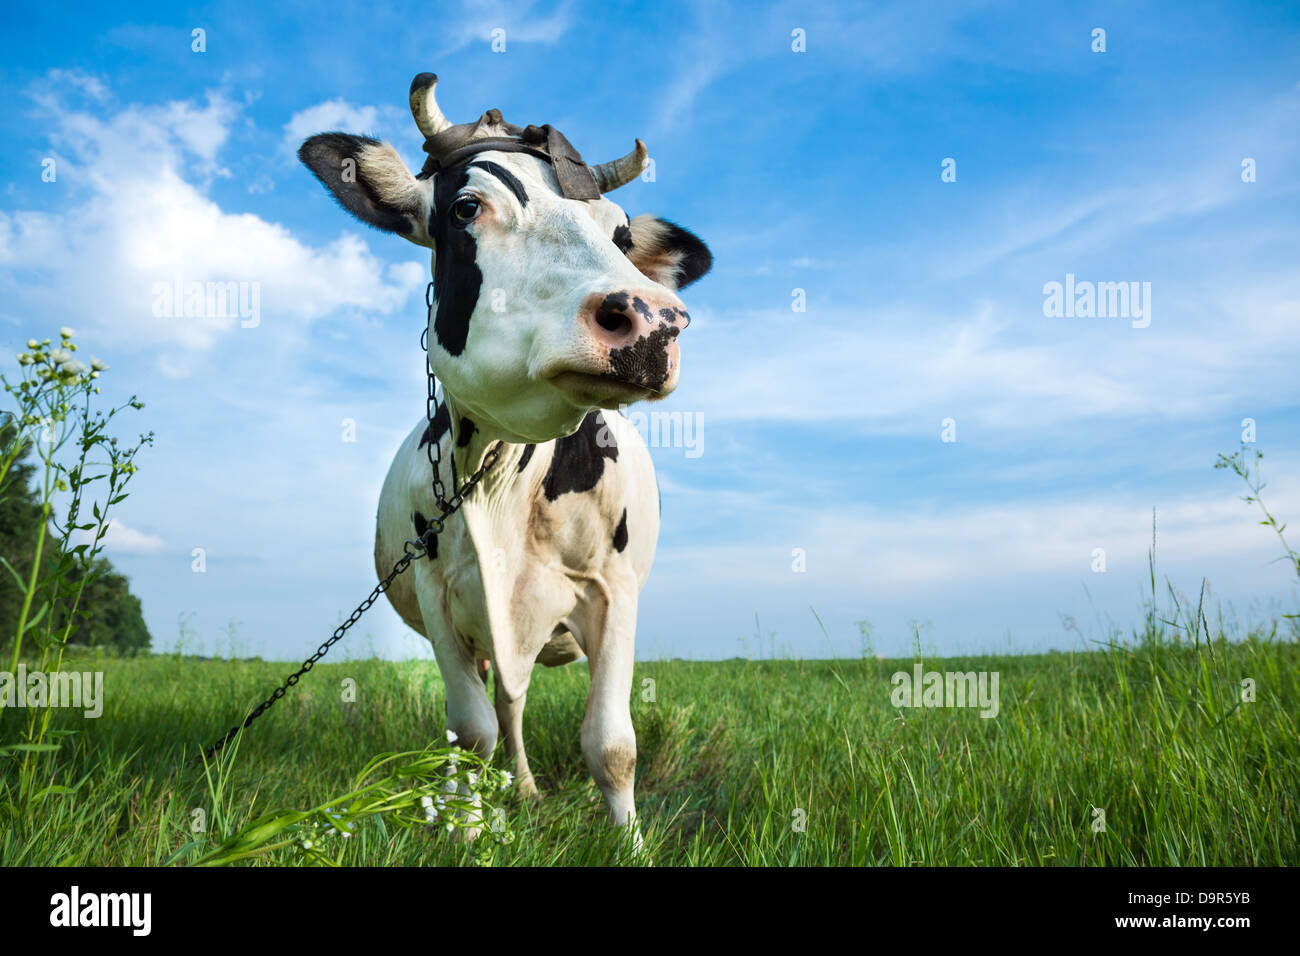 Funny black and white colour dairy cow on a pasture with fresh green grass Stock Photo